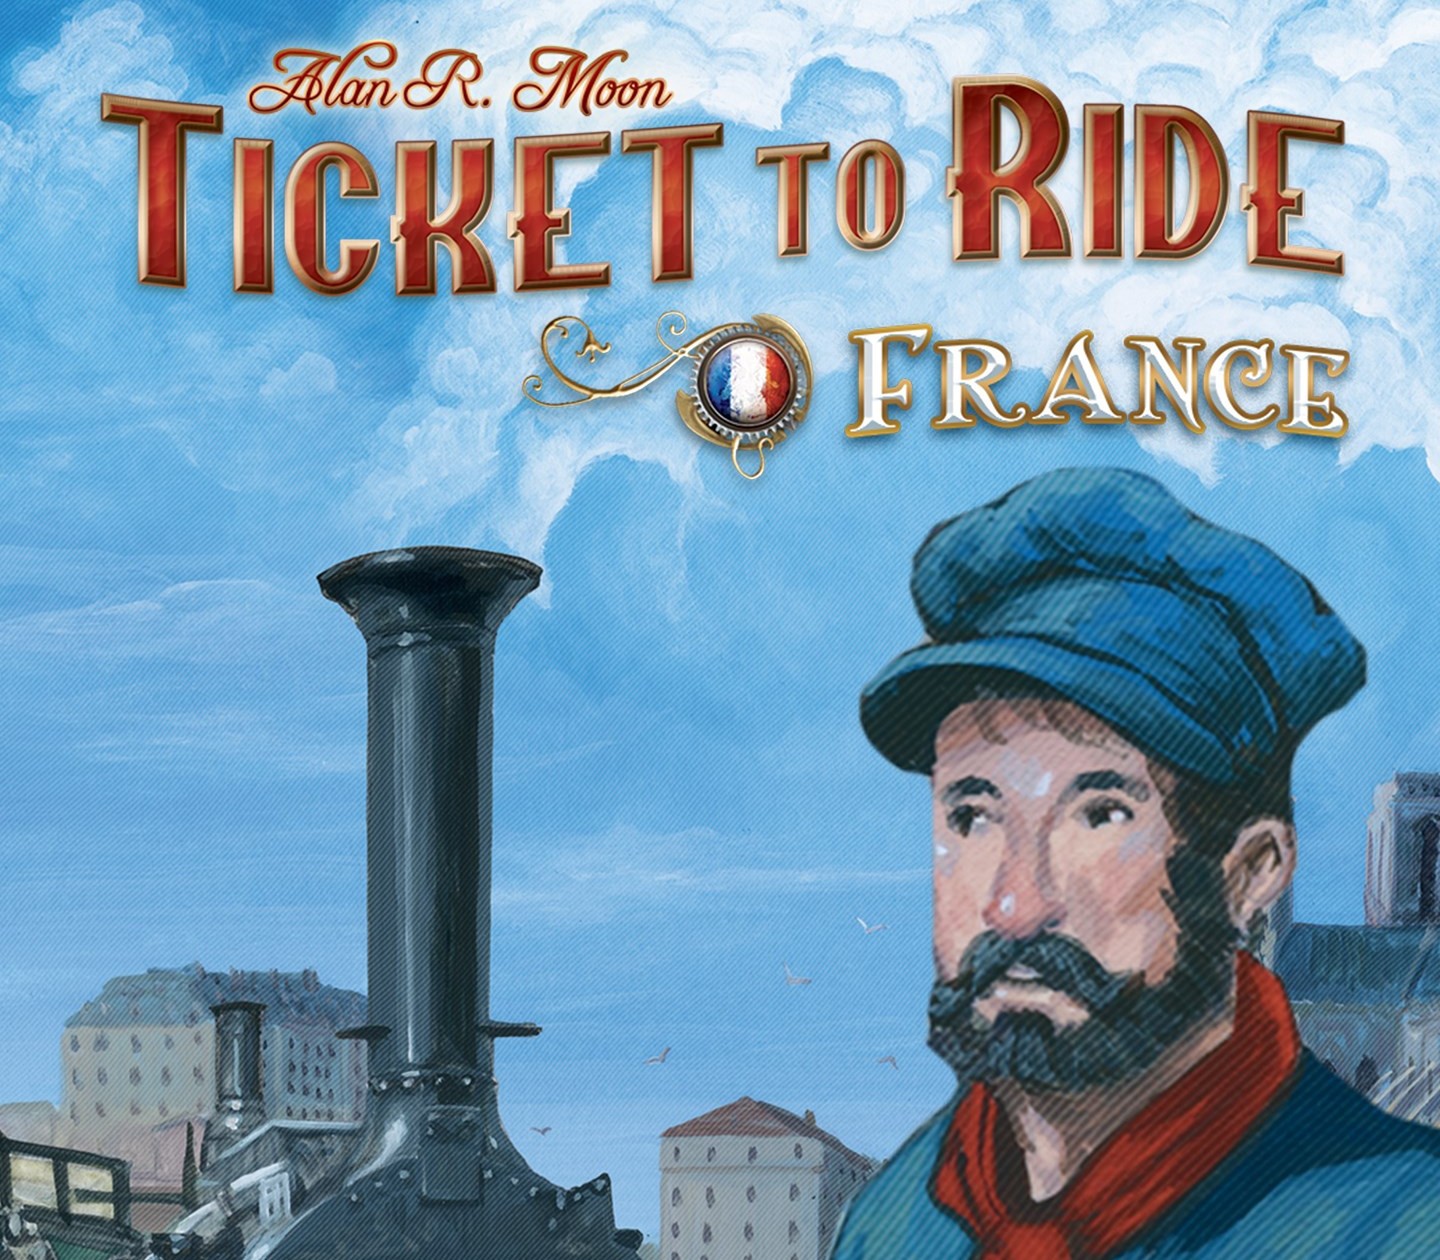 Ticket to ride steam фото 47